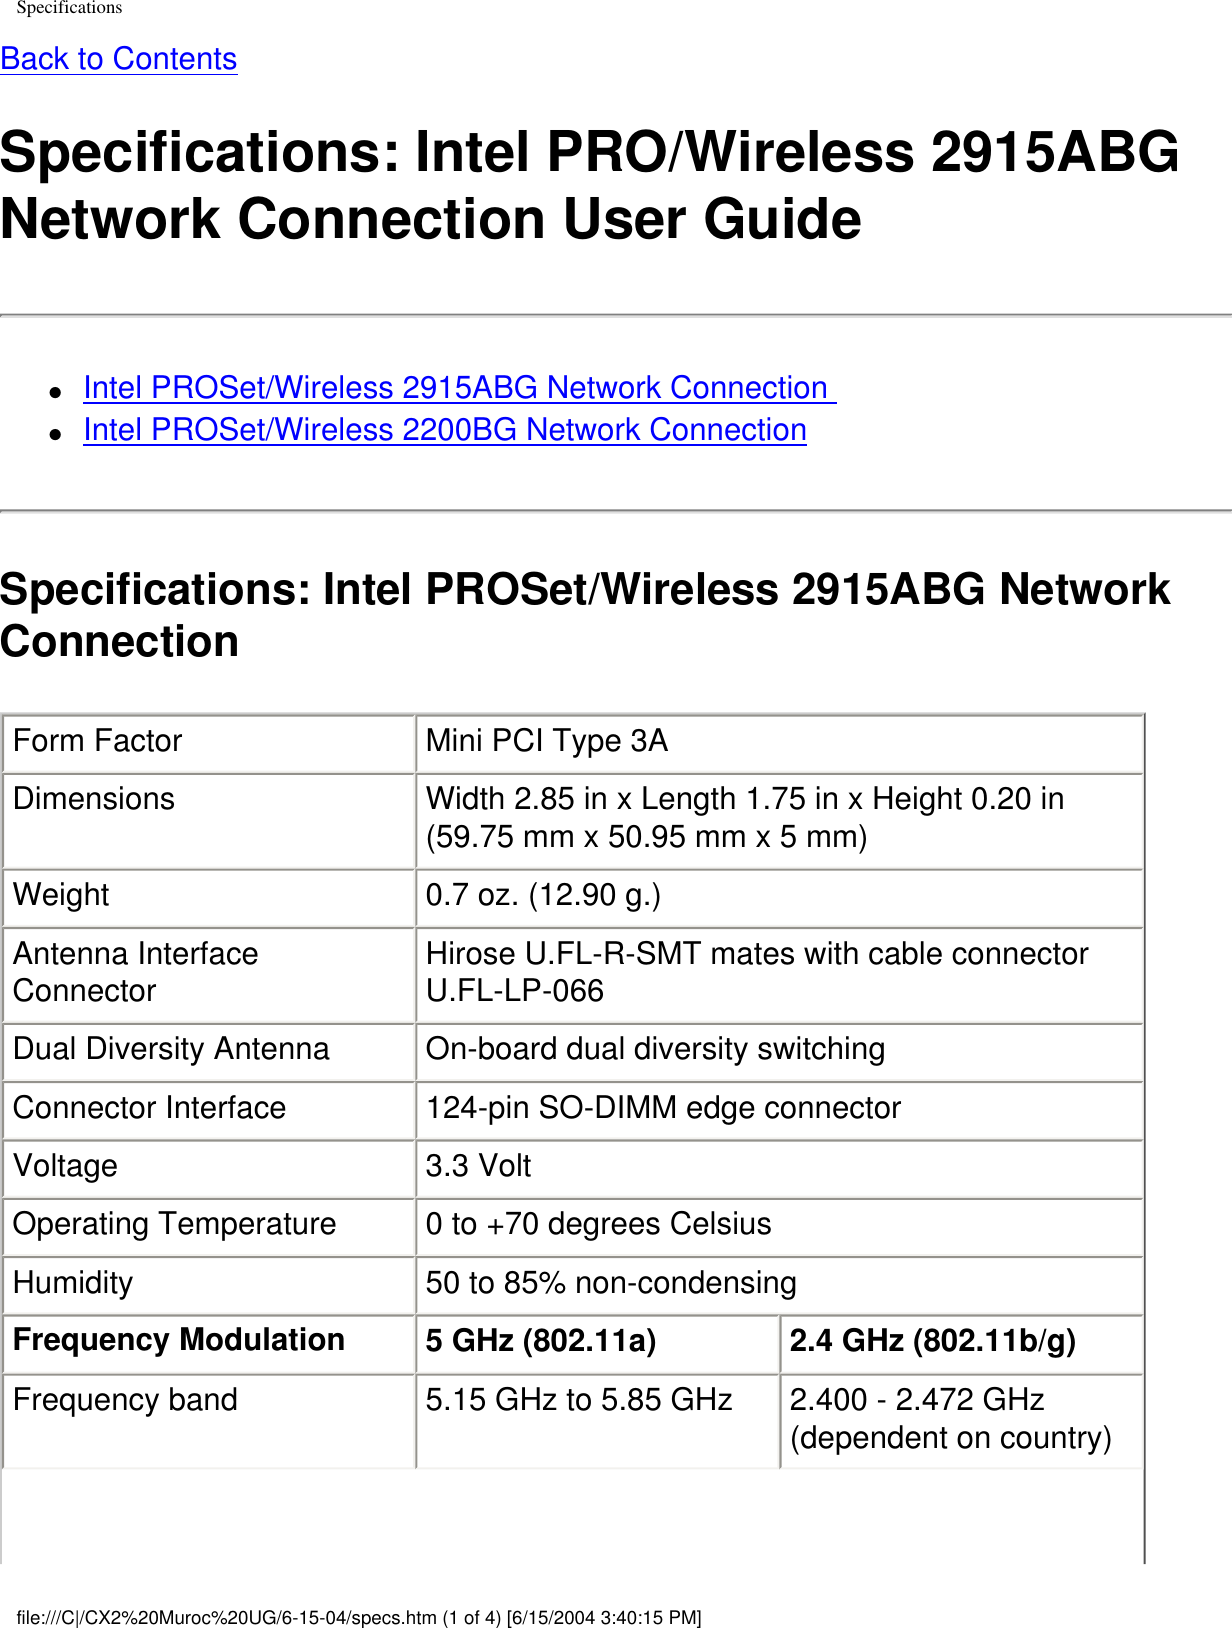 SpecificationsBack to ContentsSpecifications: Intel PRO/Wireless 2915ABG Network Connection User Guide●     Intel PROSet/Wireless 2915ABG Network Connection ●     Intel PROSet/Wireless 2200BG Network ConnectionSpecifications: Intel PROSet/Wireless 2915ABG Network ConnectionForm Factor Mini PCI Type 3ADimensions Width 2.85 in x Length 1.75 in x Height 0.20 in (59.75 mm x 50.95 mm x 5 mm)Weight 0.7 oz. (12.90 g.)Antenna Interface Connector Hirose U.FL-R-SMT mates with cable connector U.FL-LP-066Dual Diversity Antenna On-board dual diversity switchingConnector Interface 124-pin SO-DIMM edge connectorVoltage 3.3 VoltOperating Temperature 0 to +70 degrees CelsiusHumidity 50 to 85% non-condensingFrequency Modulation 5 GHz (802.11a) 2.4 GHz (802.11b/g) Frequency band 5.15 GHz to 5.85 GHz 2.400 - 2.472 GHz (dependent on country)file:///C|/CX2%20Muroc%20UG/6-15-04/specs.htm (1 of 4) [6/15/2004 3:40:15 PM]